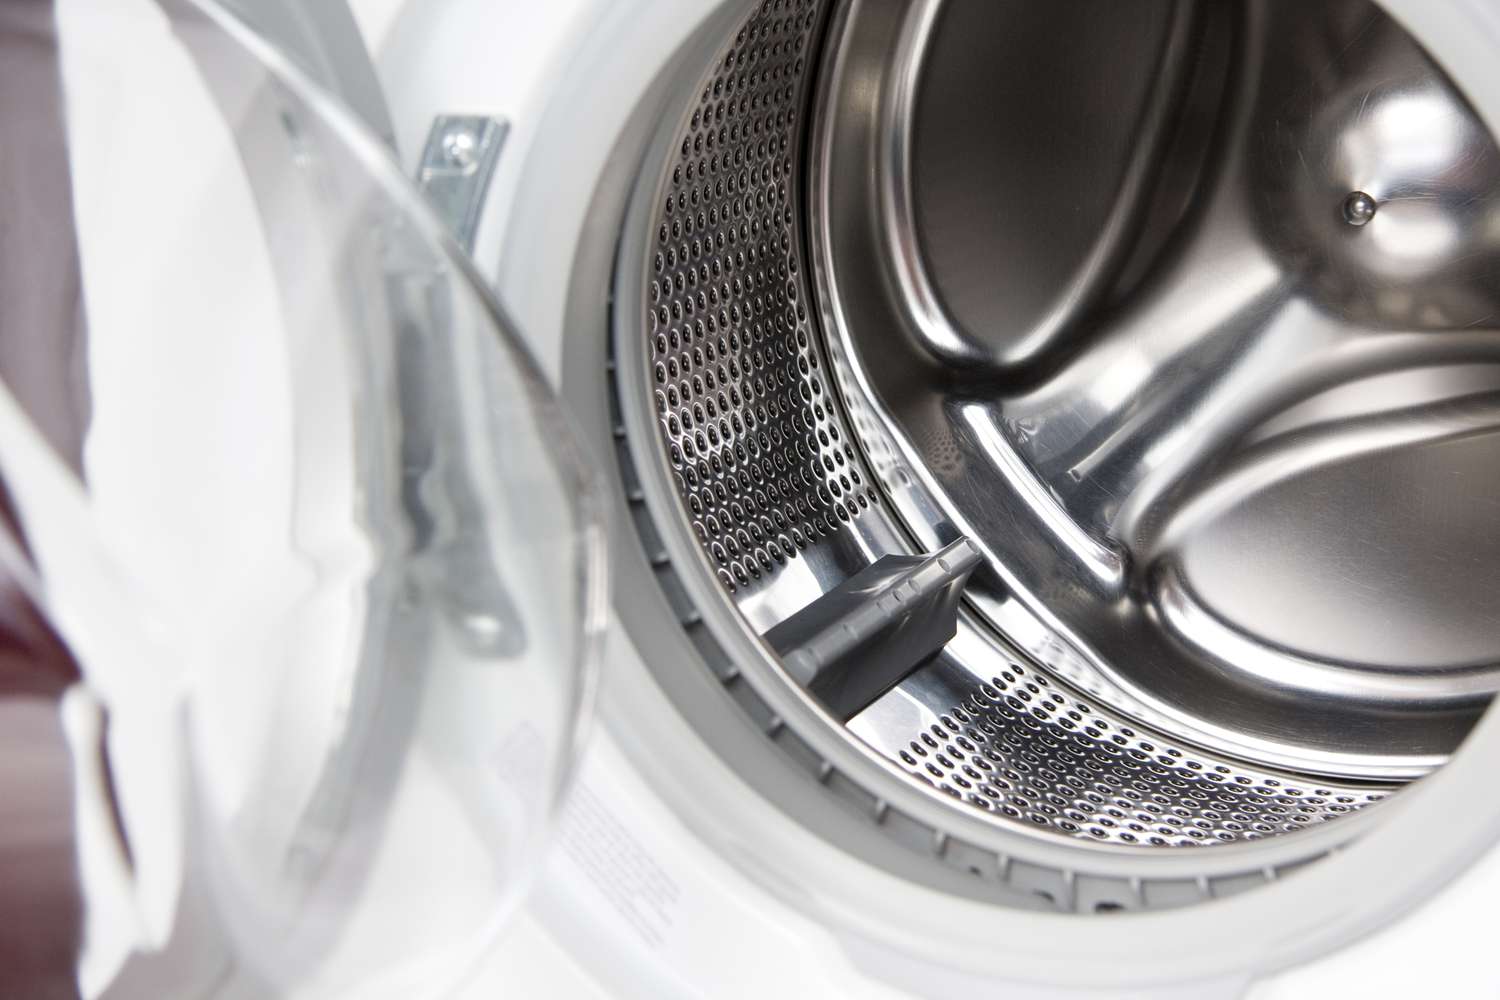 How To Fix The Error Code F31 For Whirlpool Washer